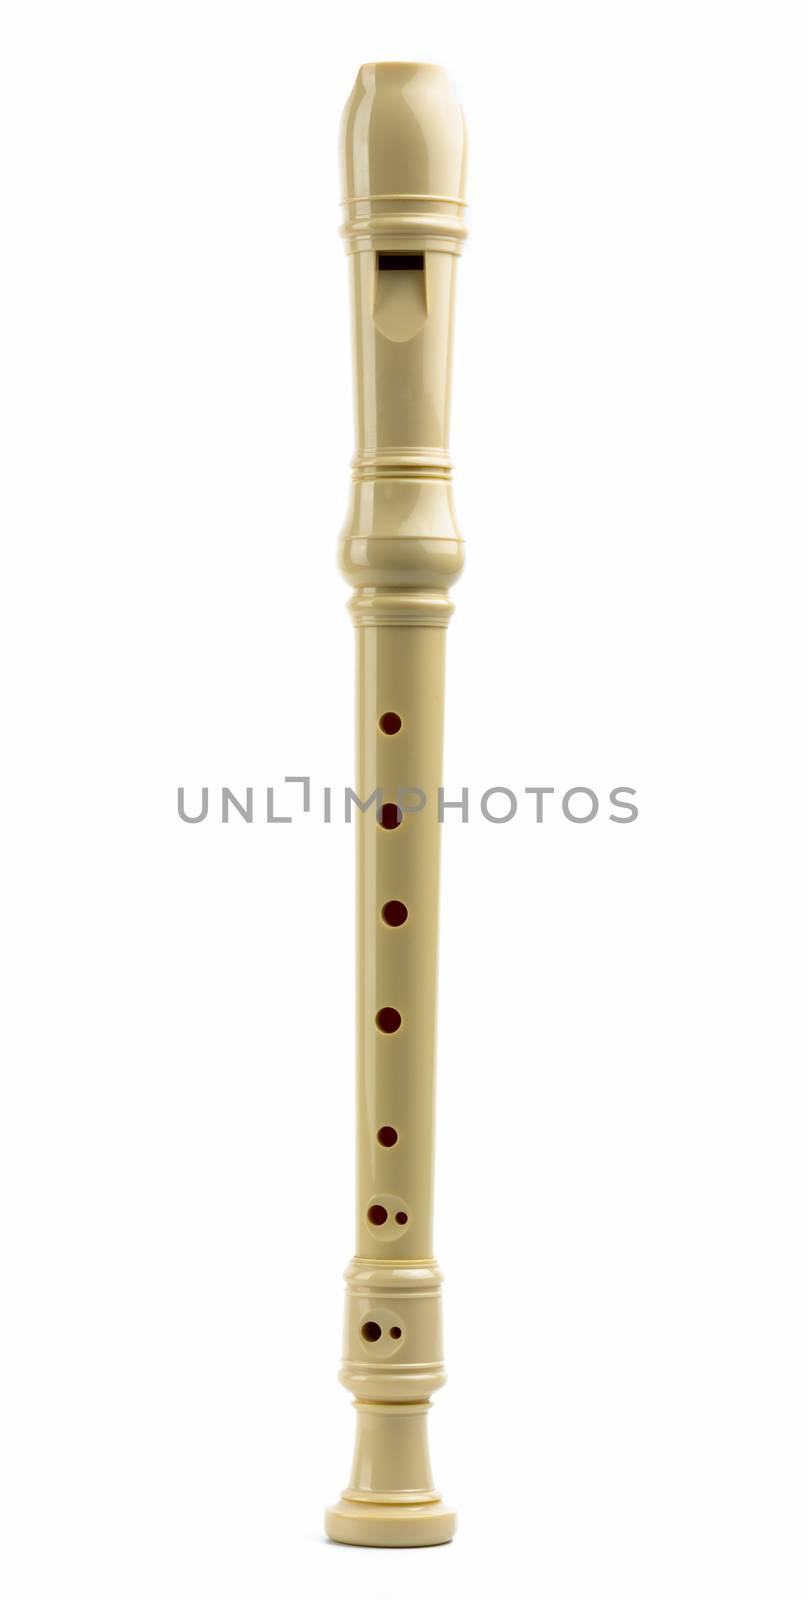 Soprano (Descant) recorder. Plastic recorder flute isolated on white background with copy space for text. Classical Baroque music instruments. Education on music class.